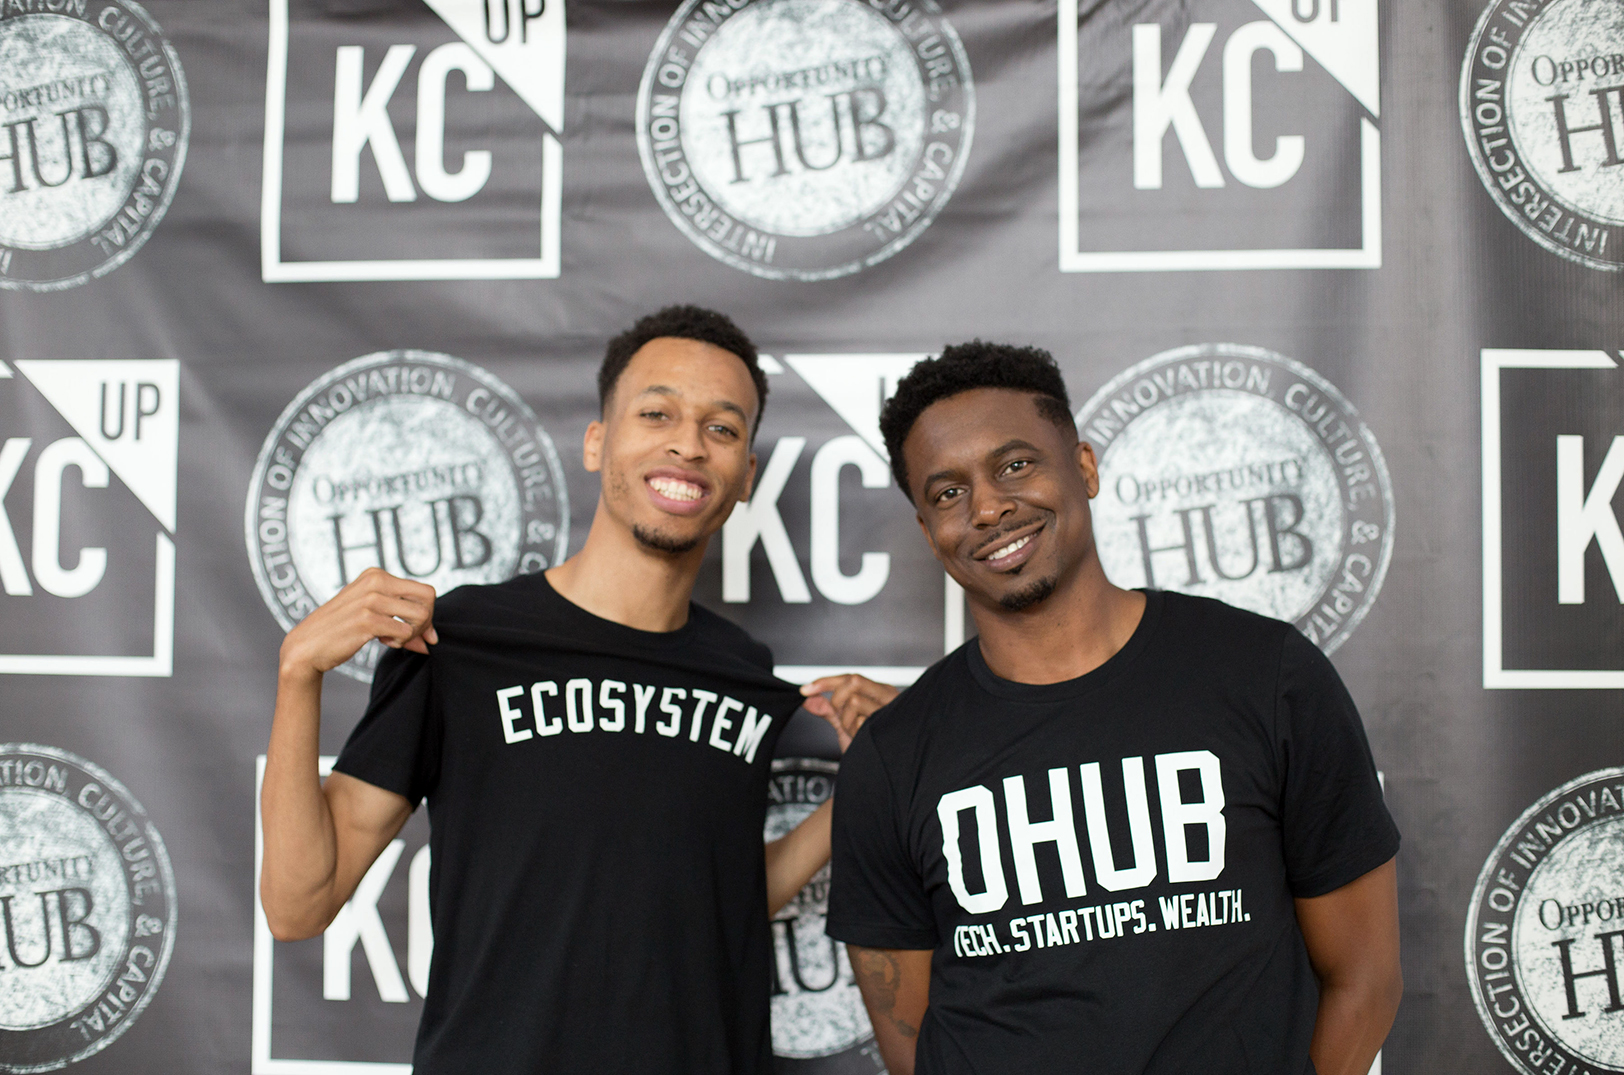 OHUB’s ‘unapologetic’ arrival in KC comes with $300K in support; ‘Cosby Show’ alum at Friday event